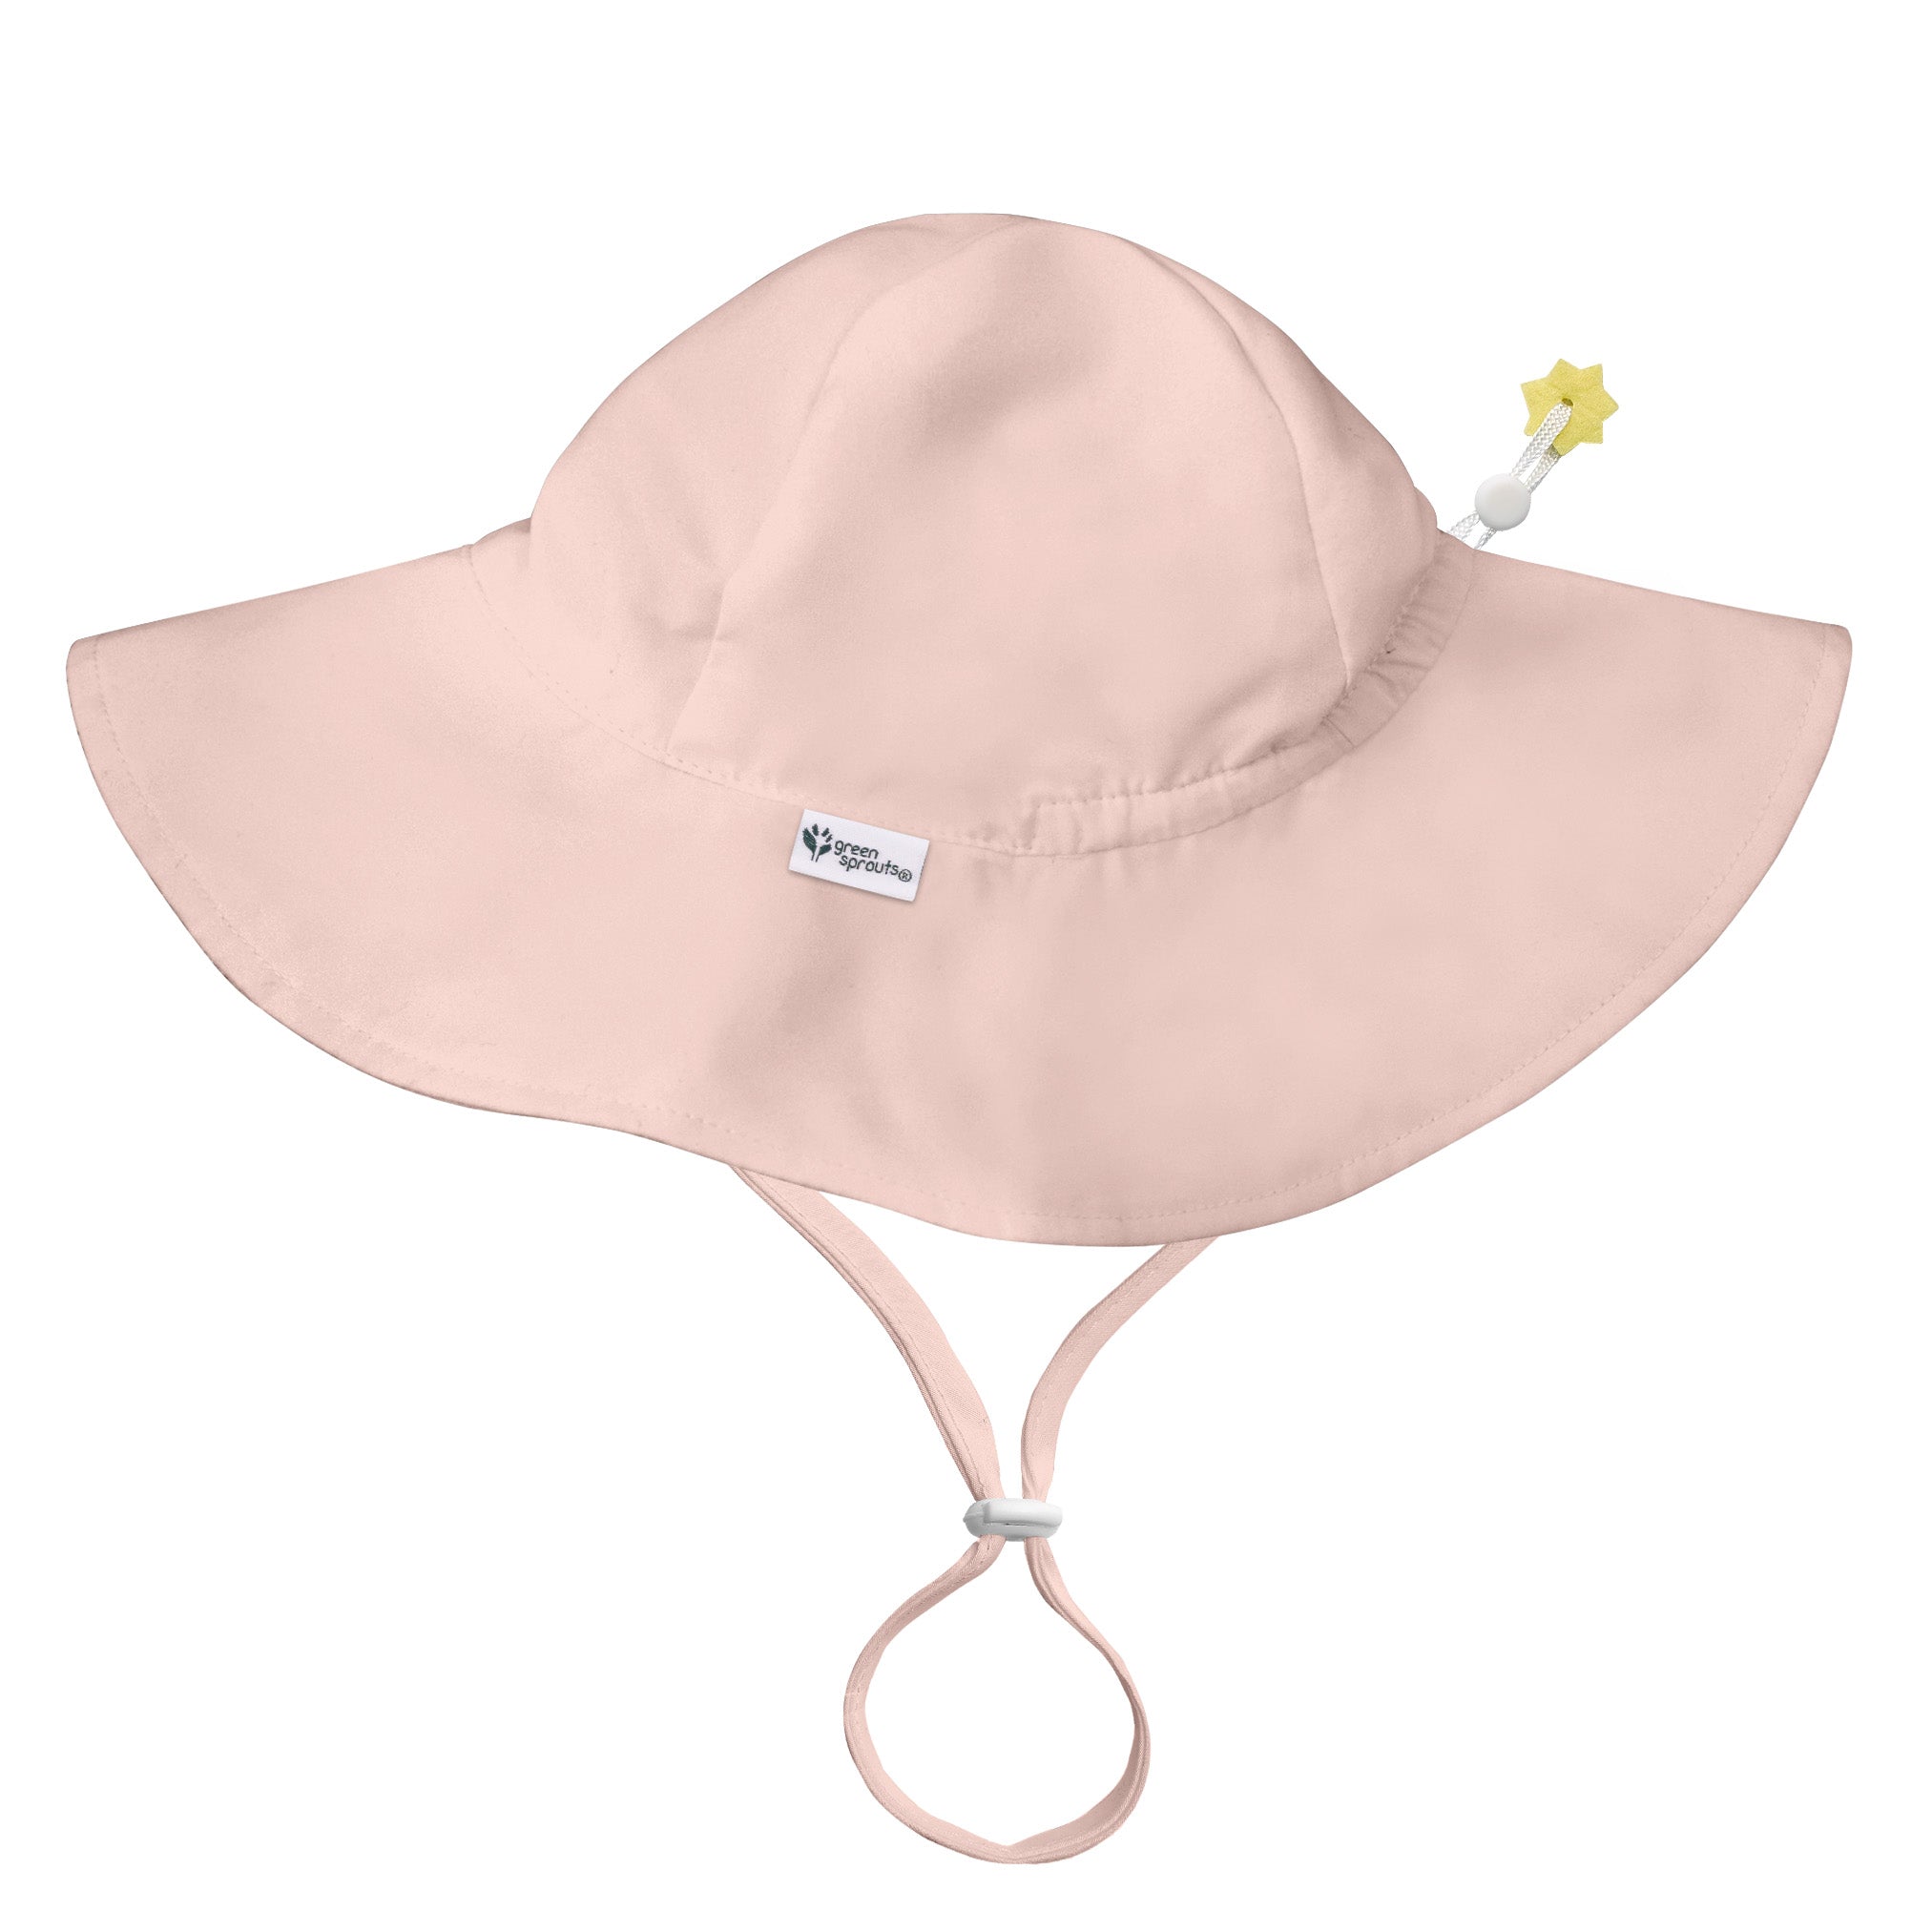 I Play - Brim Sun Protection Hat - Light Pink-2T/4T